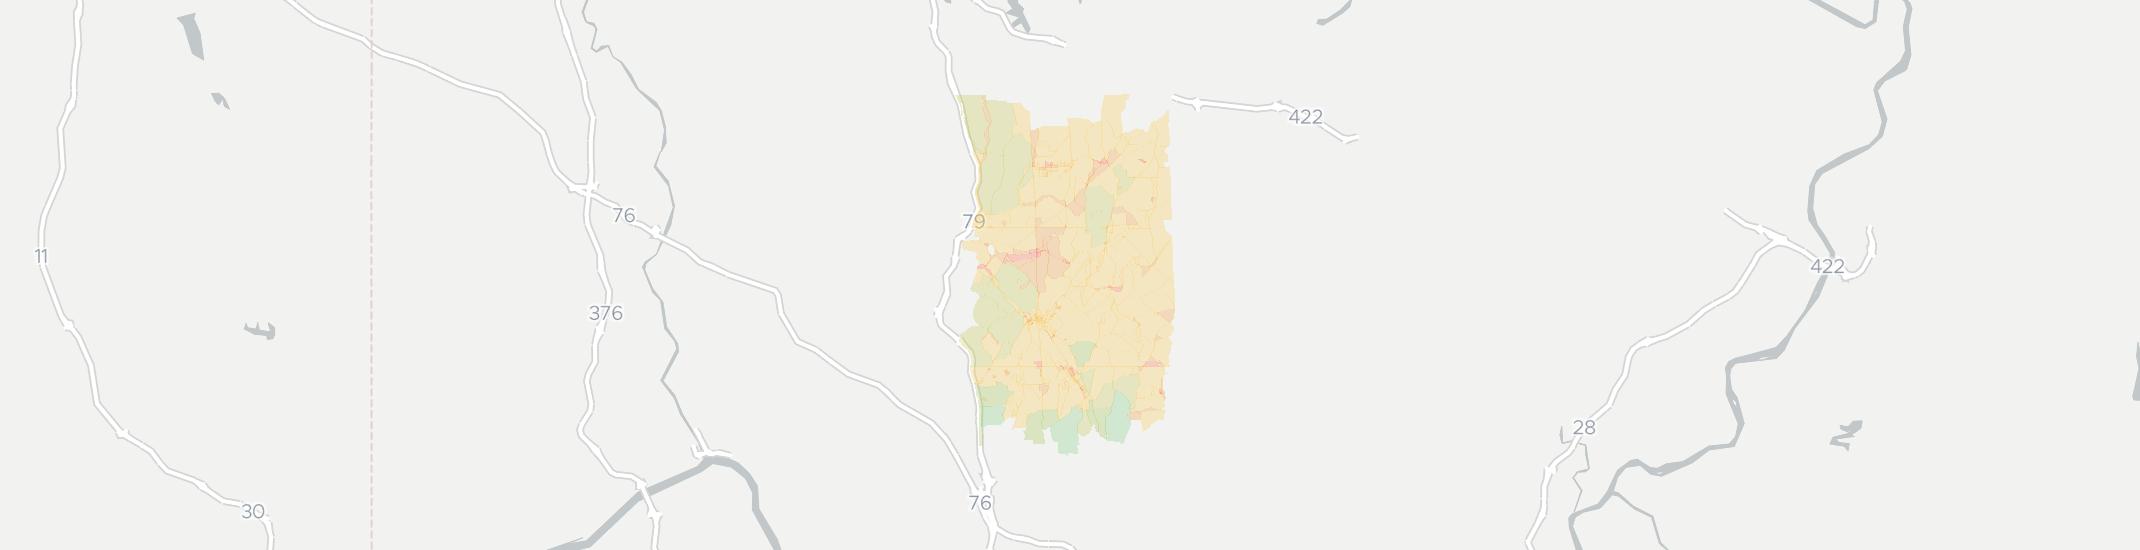 Evans City Internet Competition Map. Click for interactive map